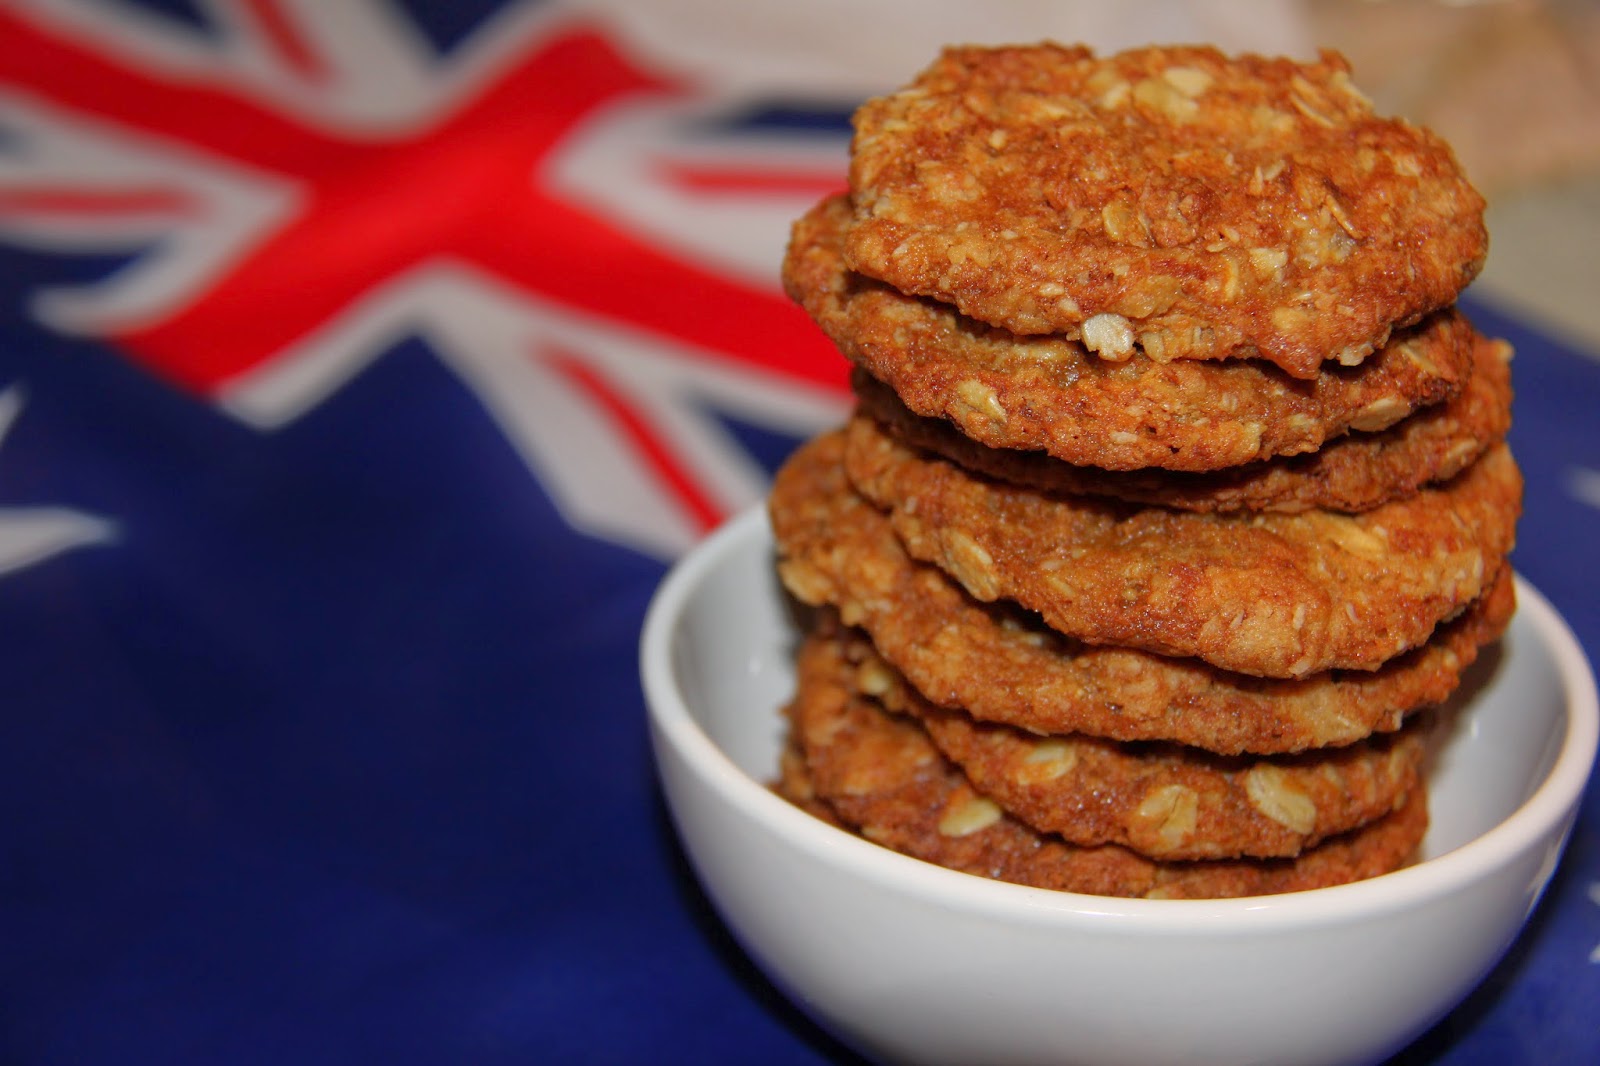 Passion for Baking: ANZAC Biscuits